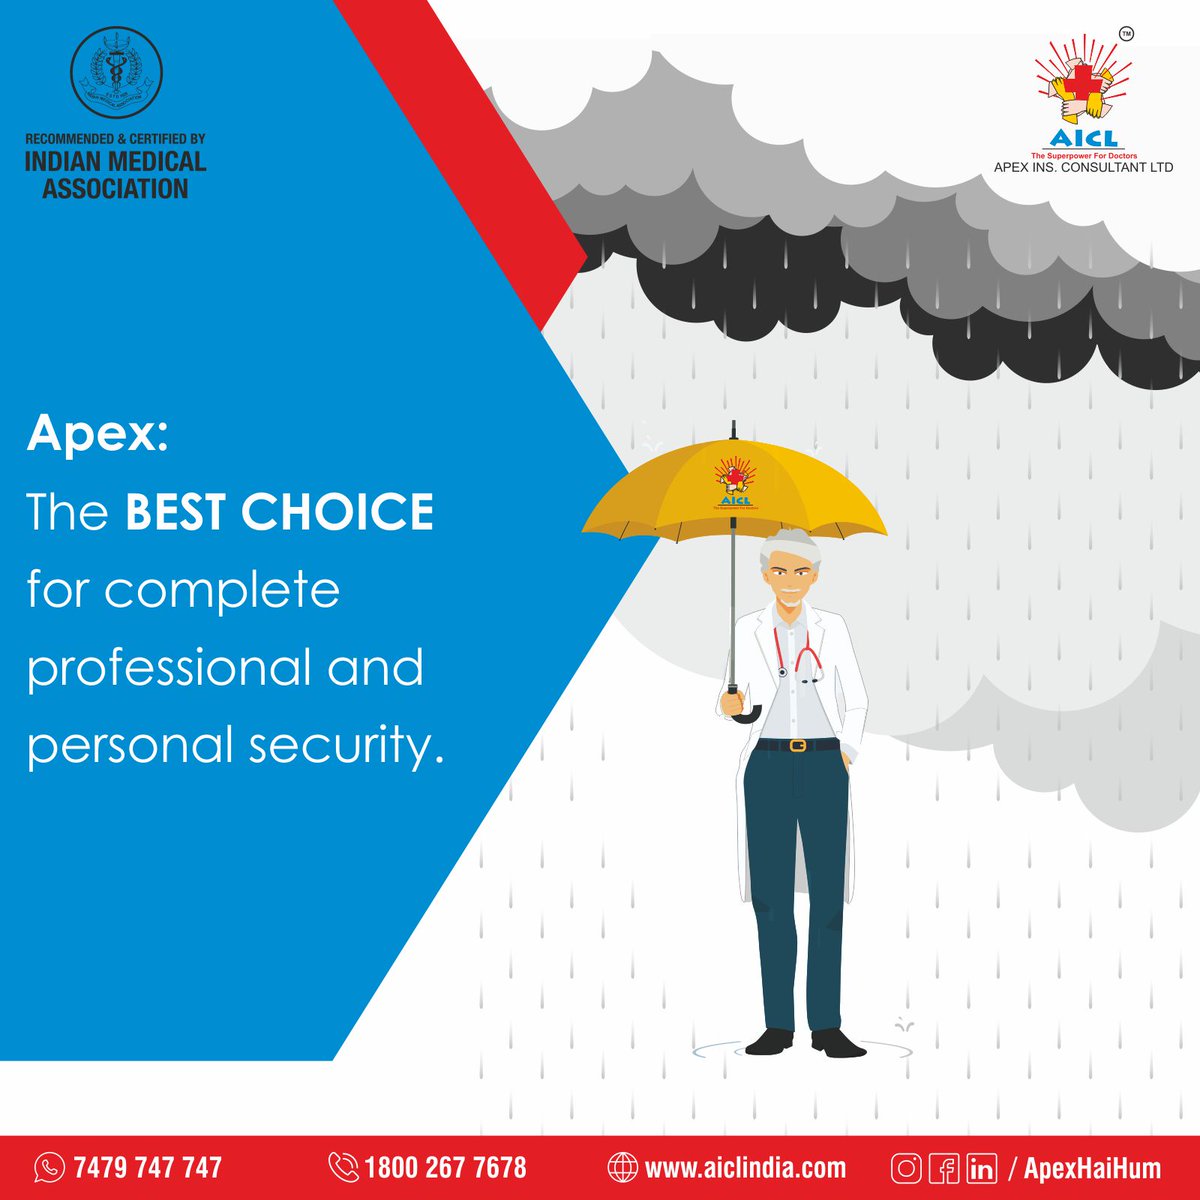 🔝 Apex: The best choice for complete professional and personal security. Trust us to protect your practice and provide peace of mind in every aspect of your life. #ApexRiskManagement #BestChoice #ProfessionalSecurity #PersonalSecurity